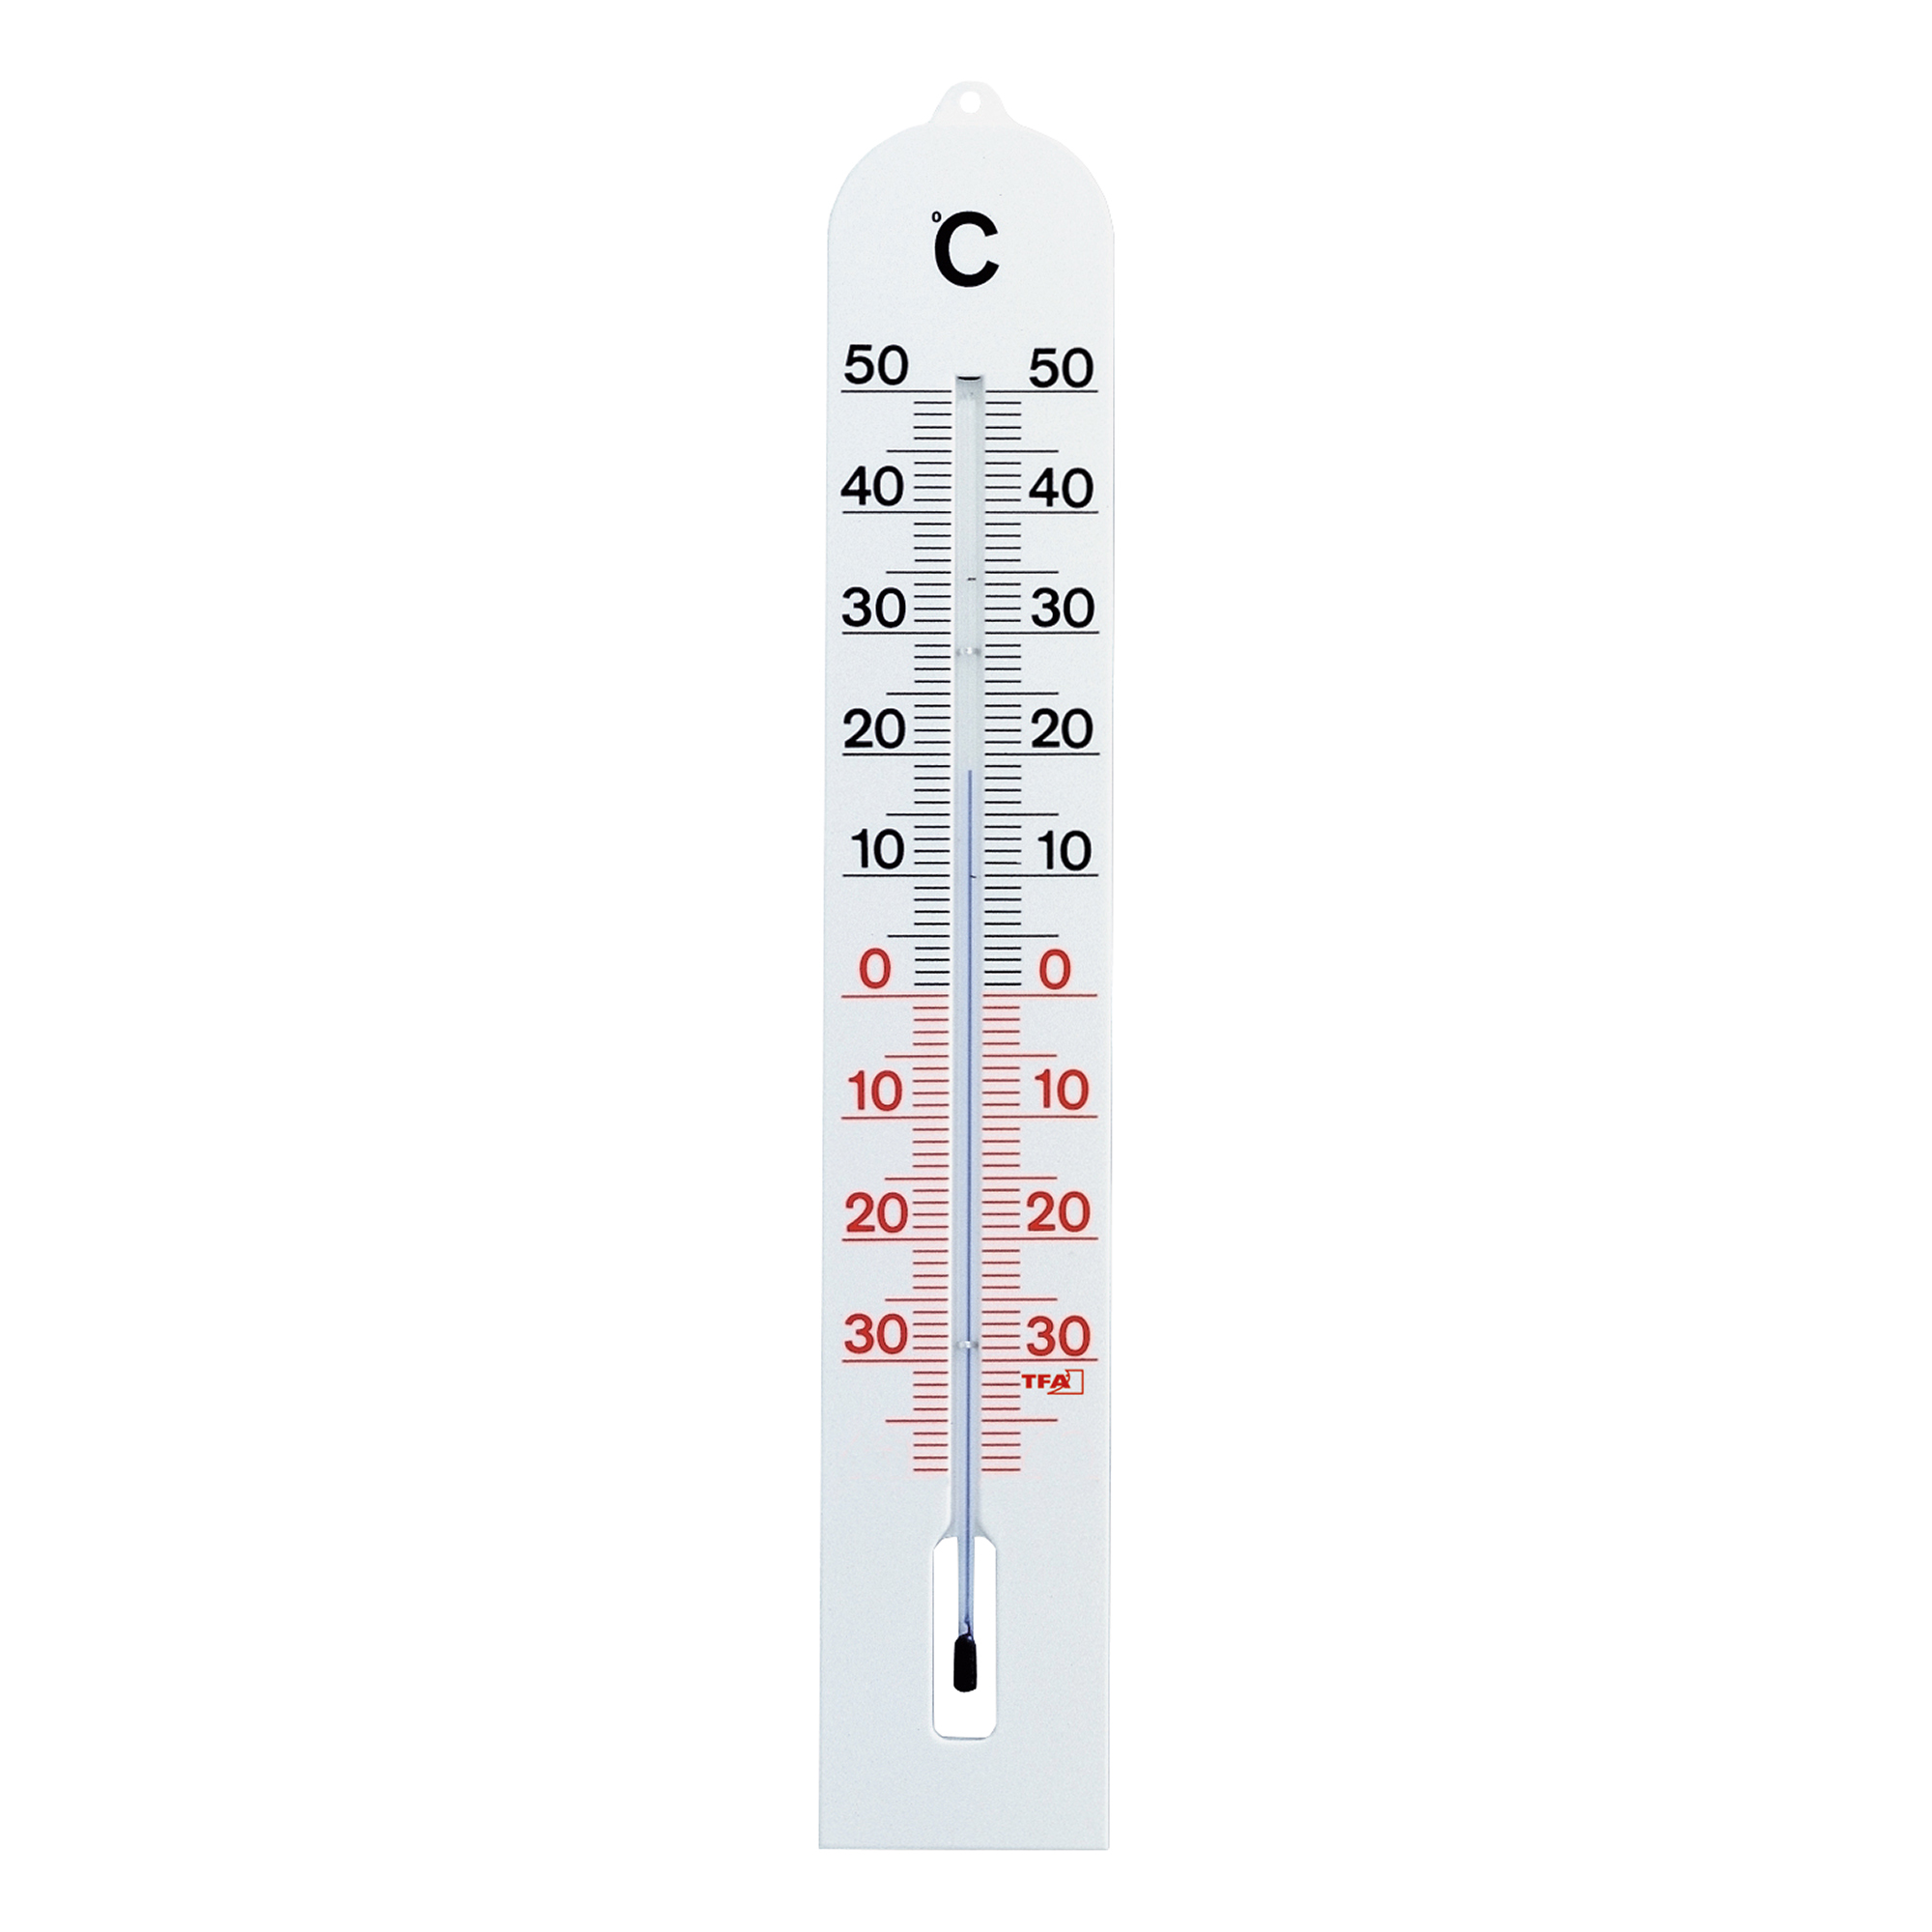 Digital Outdoor Thermometers: Outdoor Thermometers To Update You About The  Outside Weather Conditions